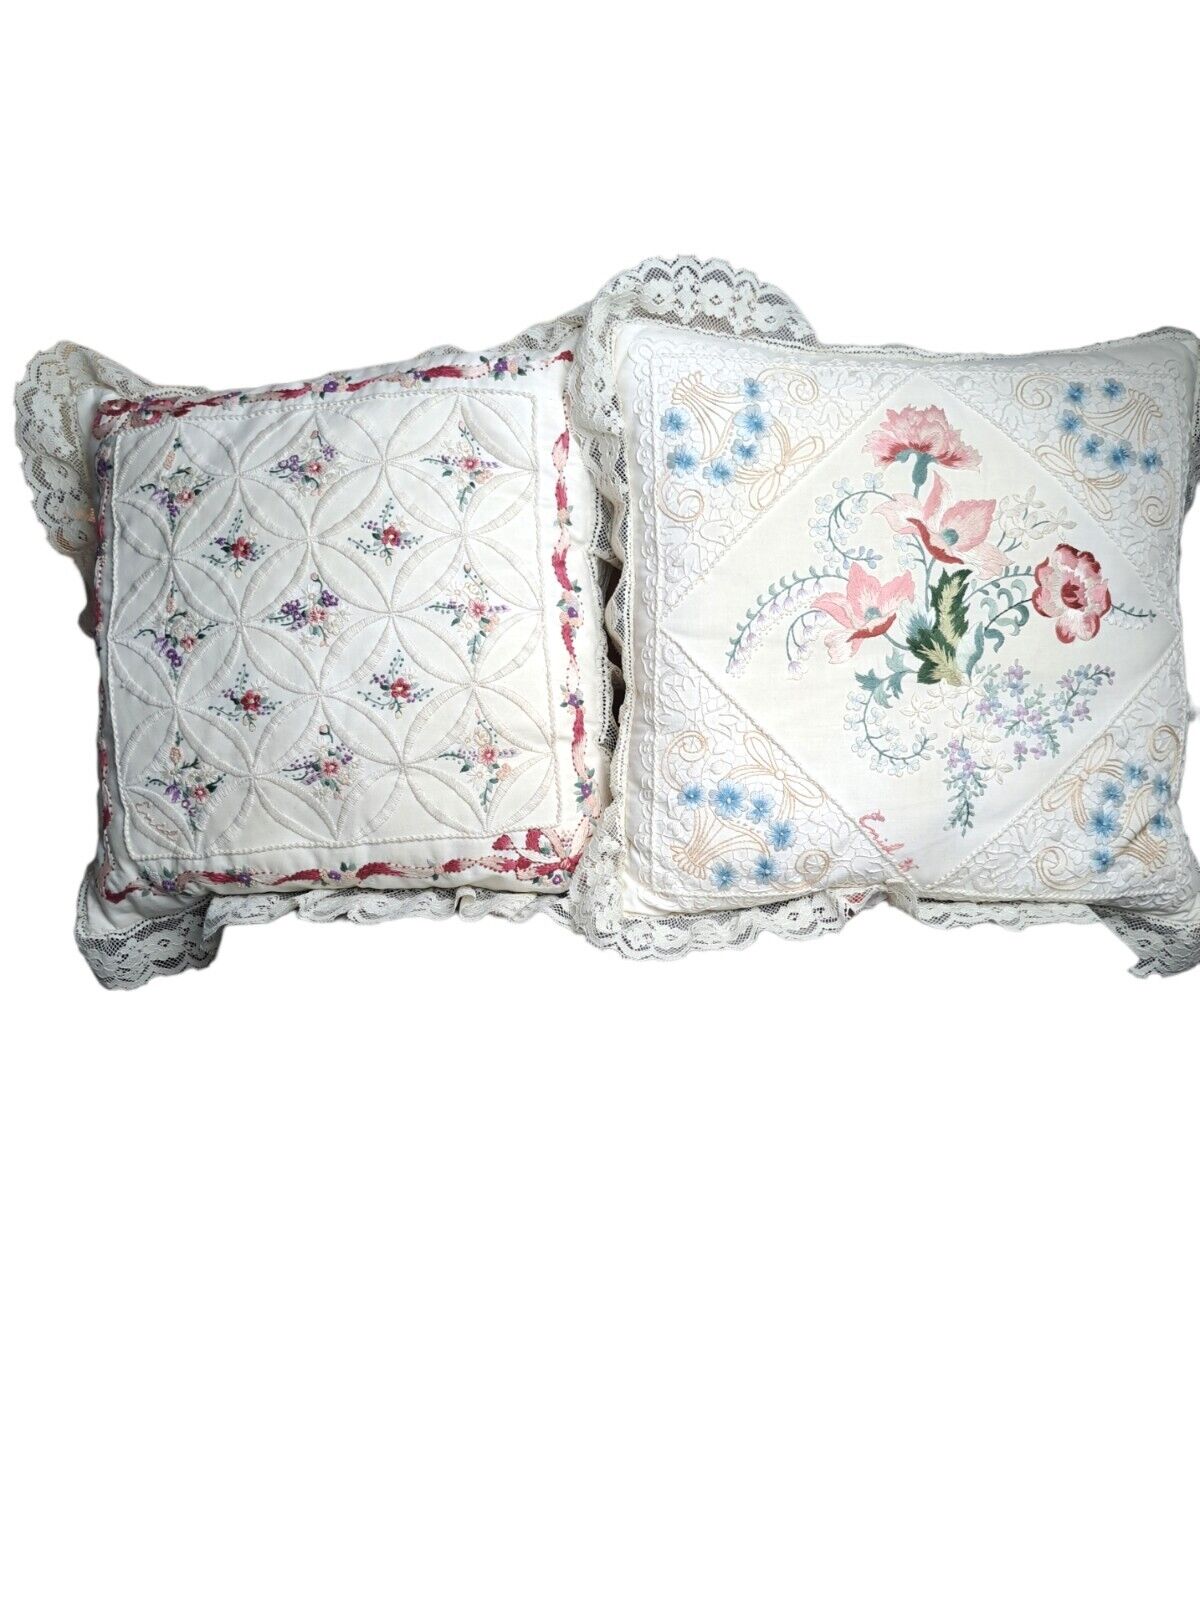 Vintage Pair Hand Embroidered Floral Throw Pillows~Granny Core~Lace Edges~Signed